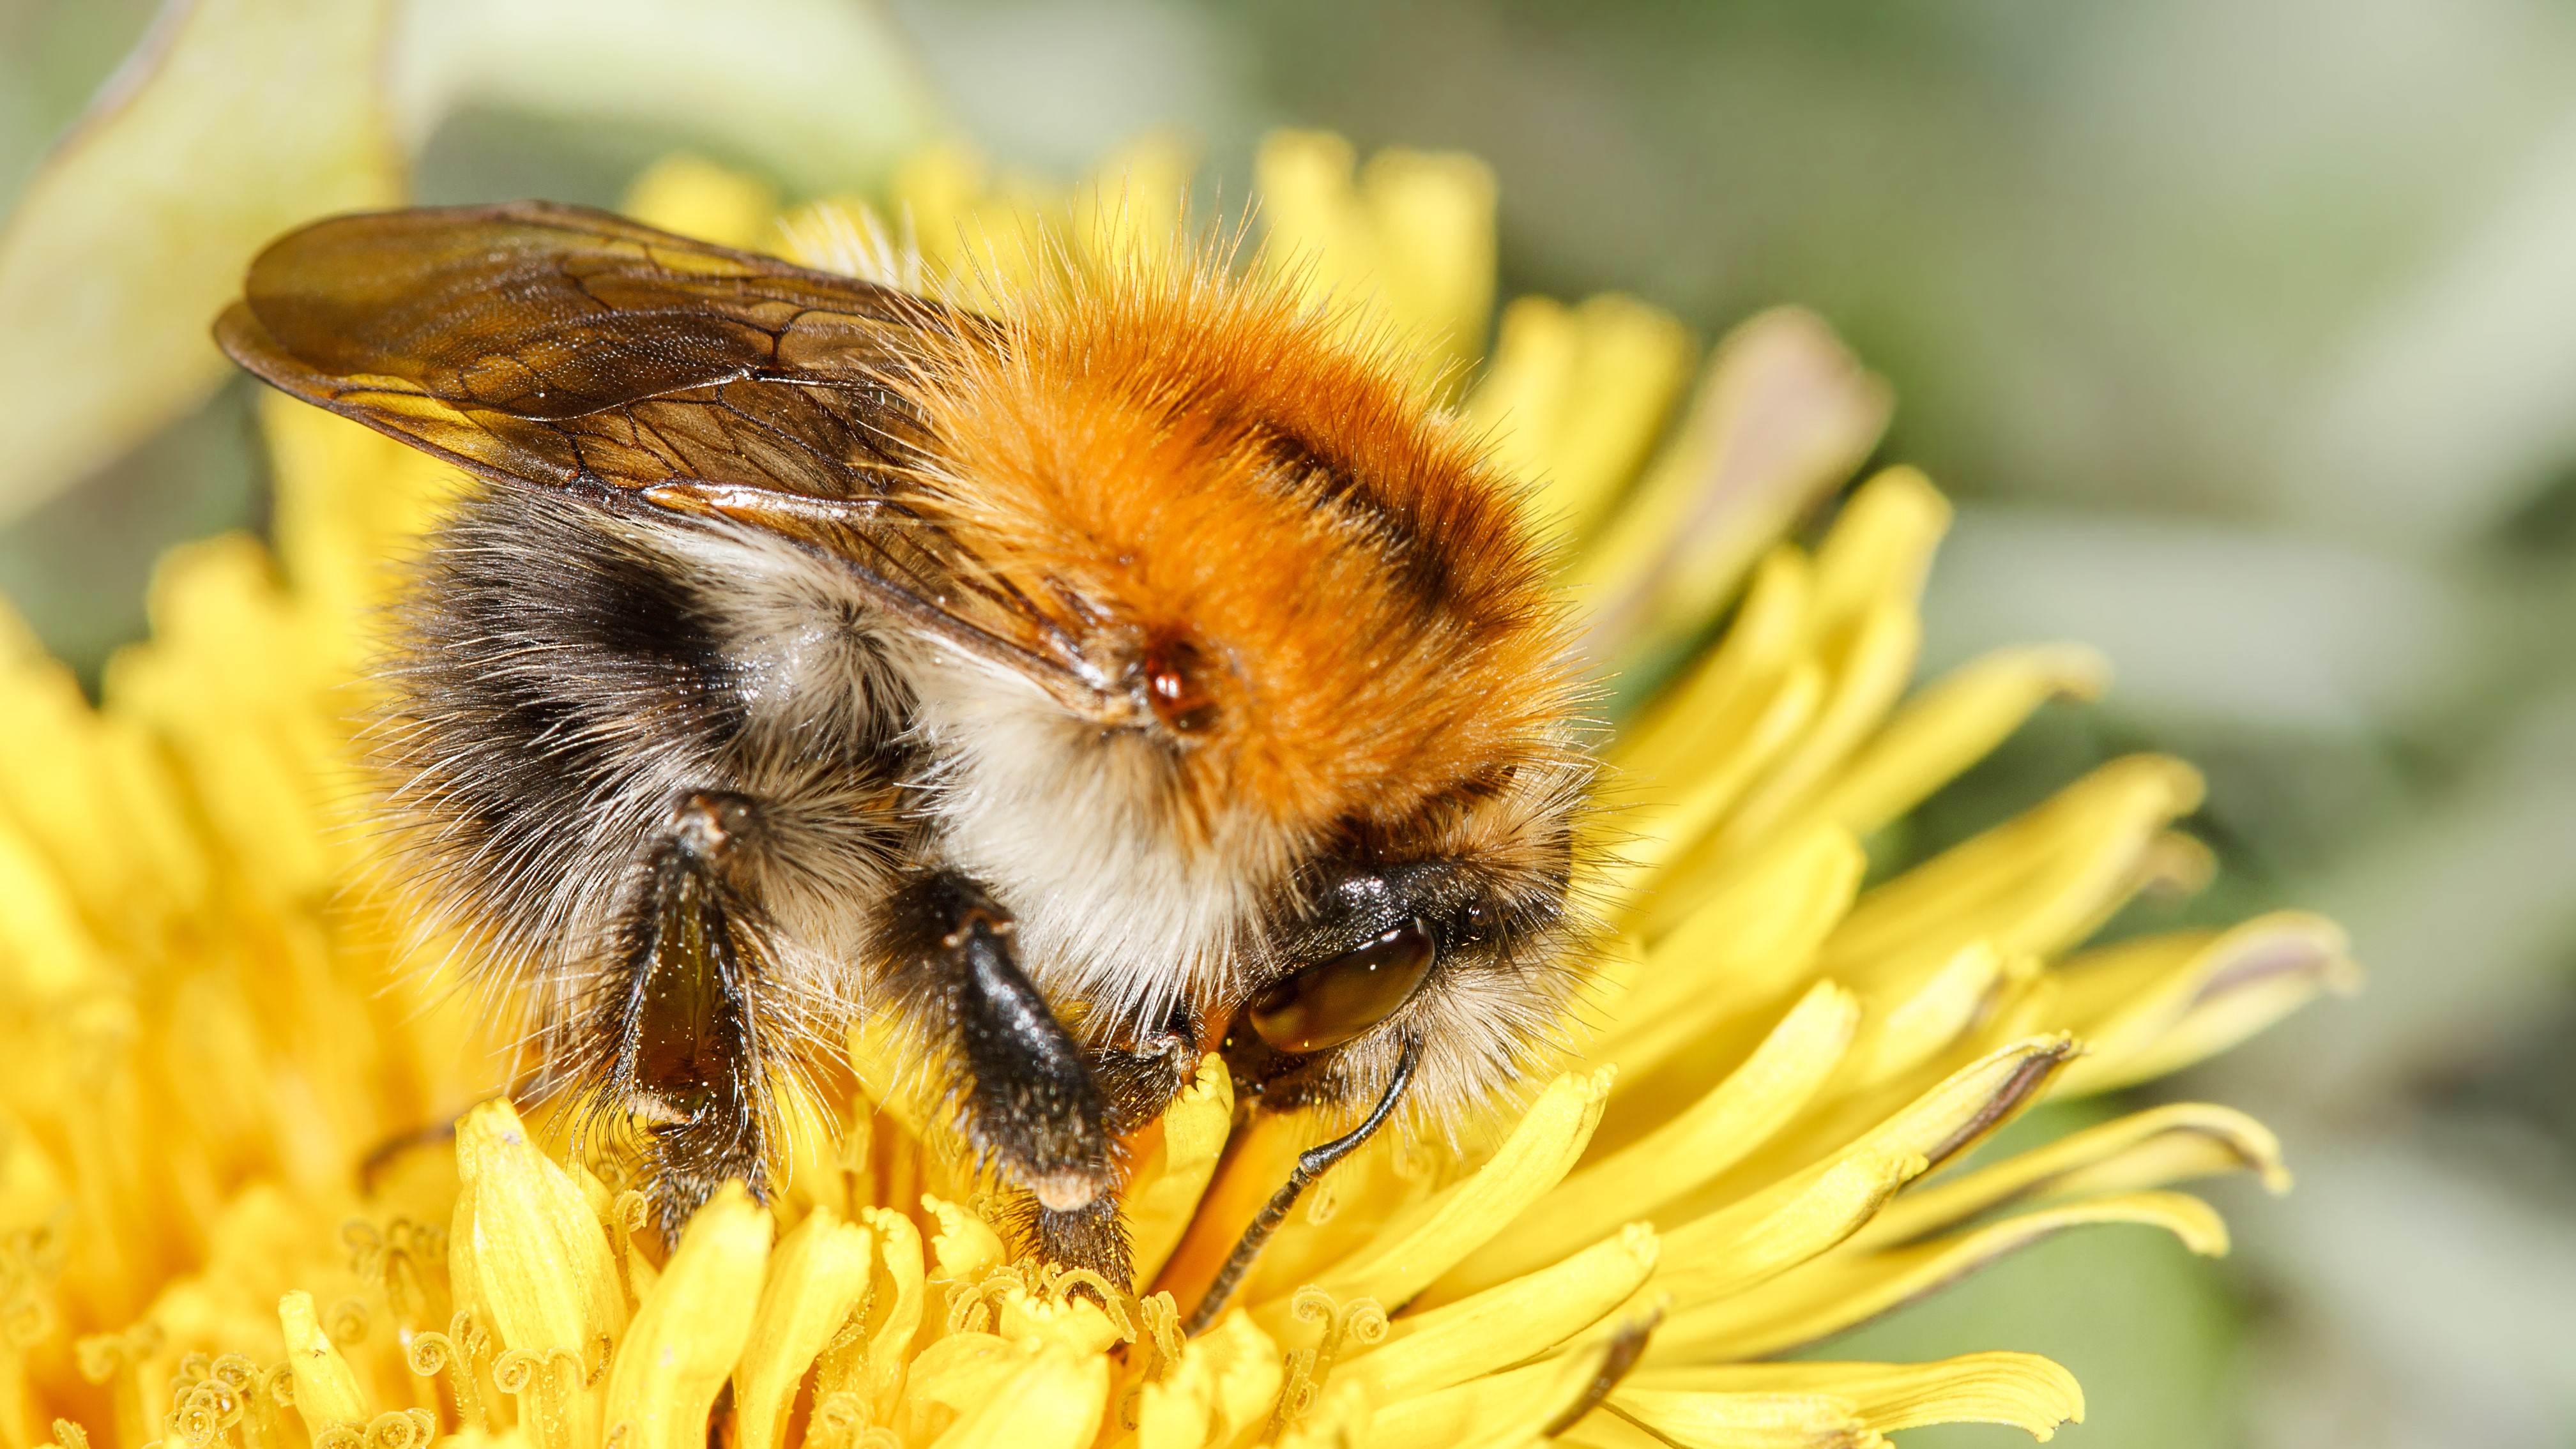 Common Carder Bees Attract Bees